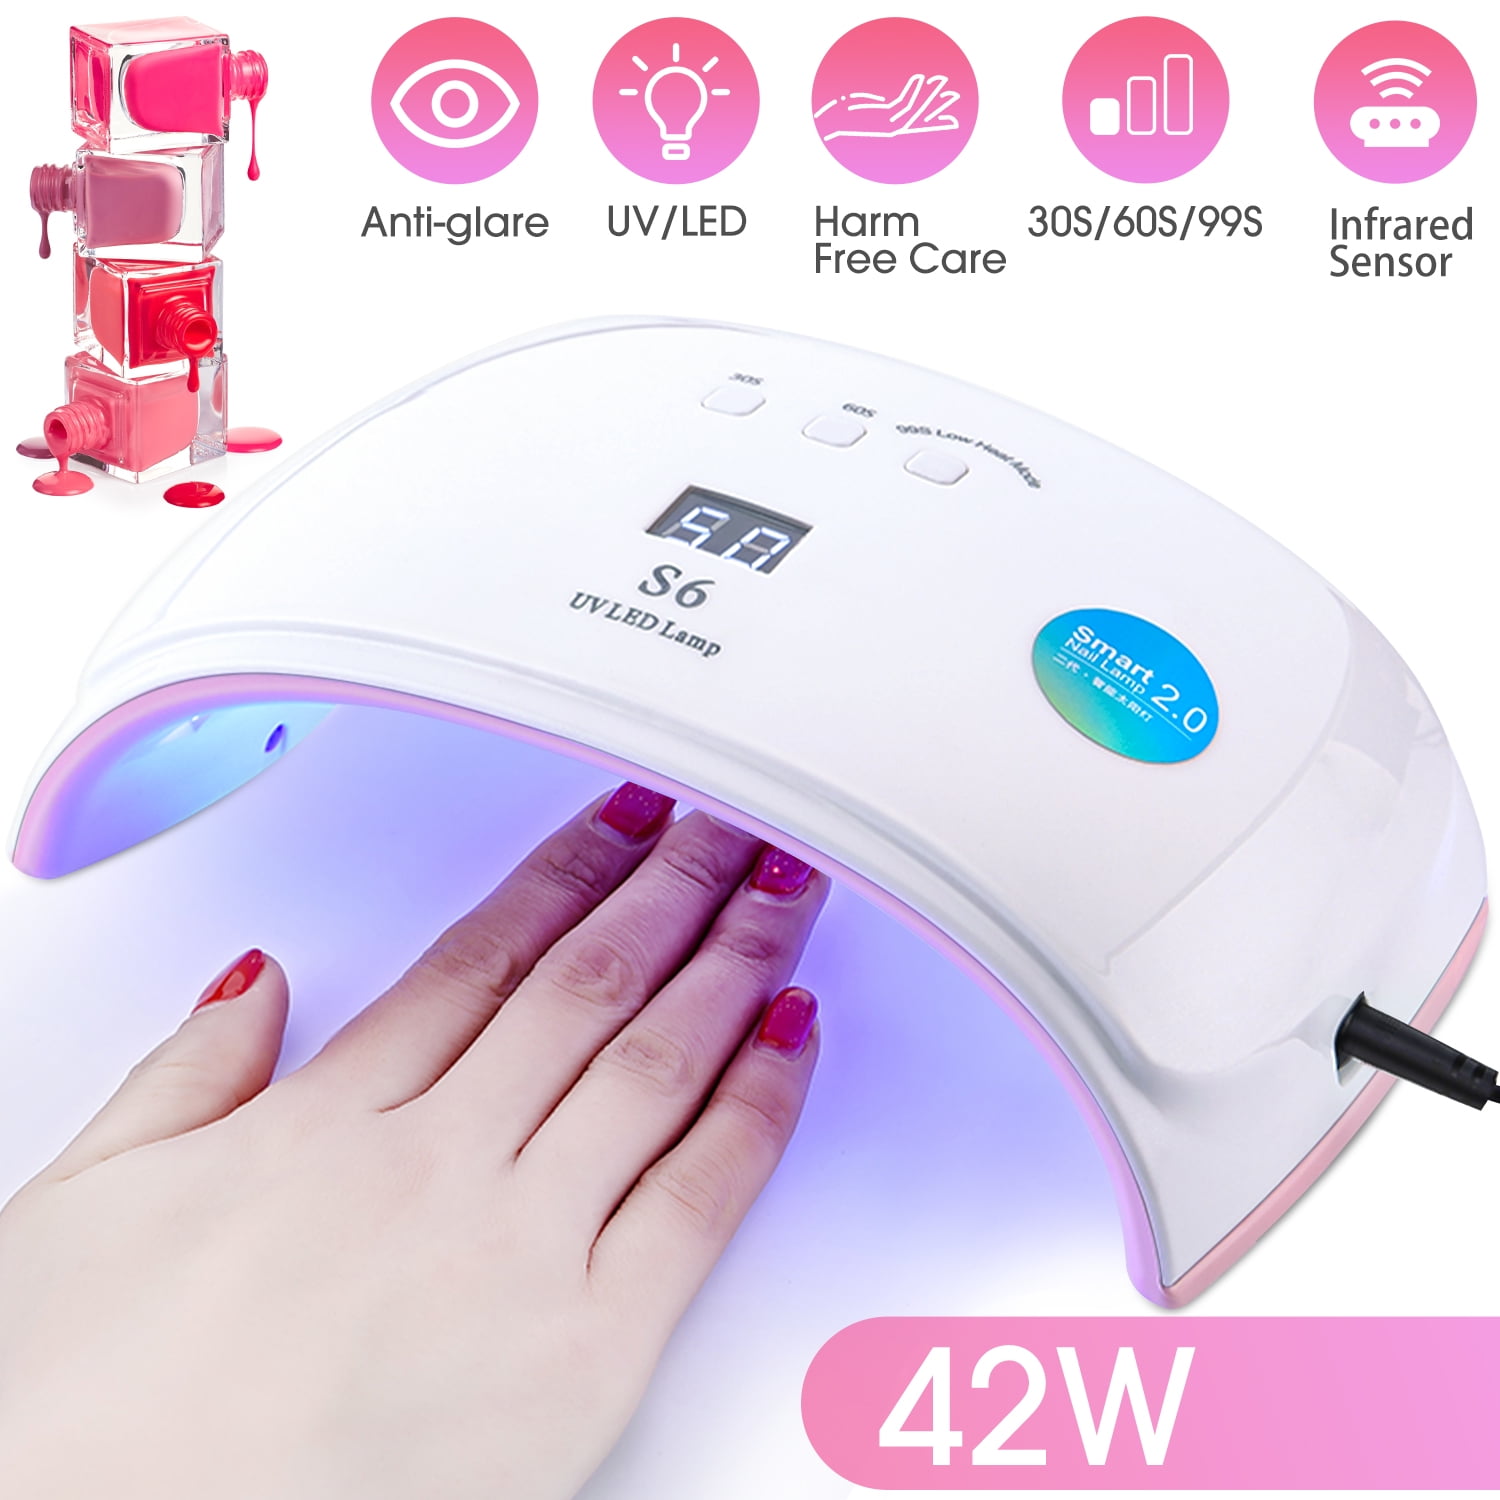 UV LED Nail Lamp, 42W Nail Dryer Gel Nail Light Nail Polish, Light Curing in Modes for Time, for Pedicure Nail at Home - Walmart.com